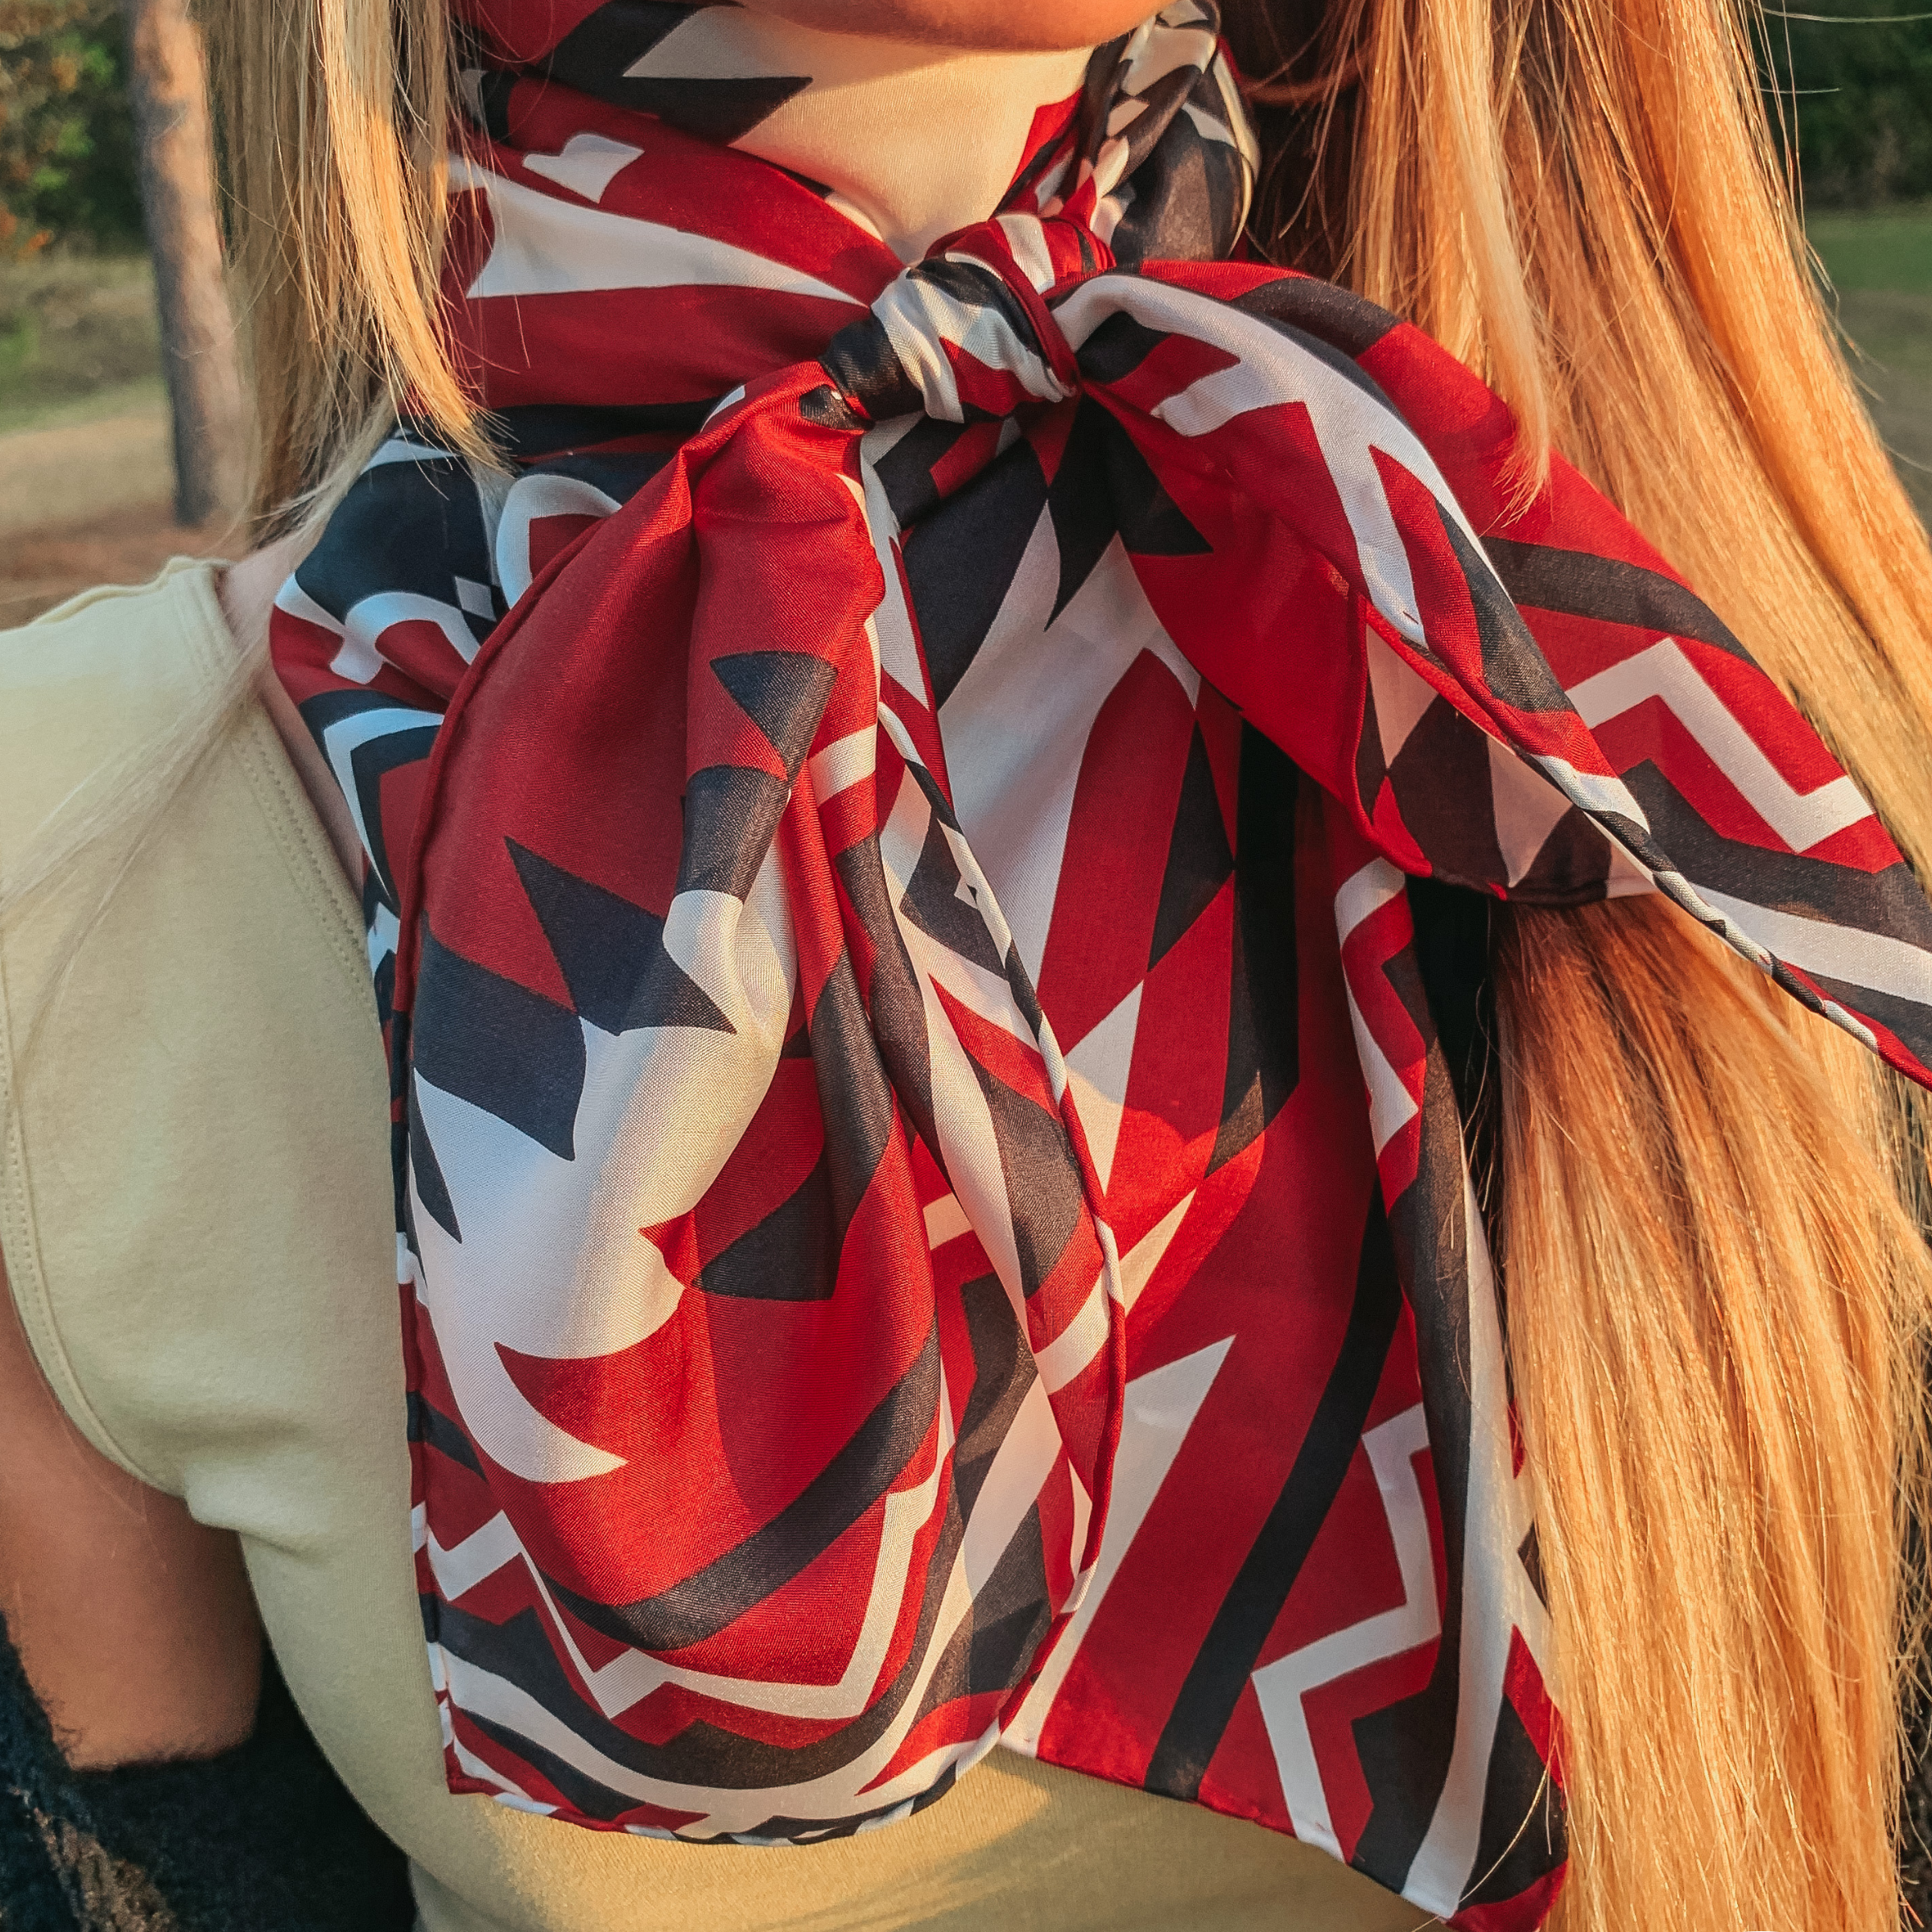 Southwest Wild Rag in Red and Black - Giddy Up Glamour Boutique